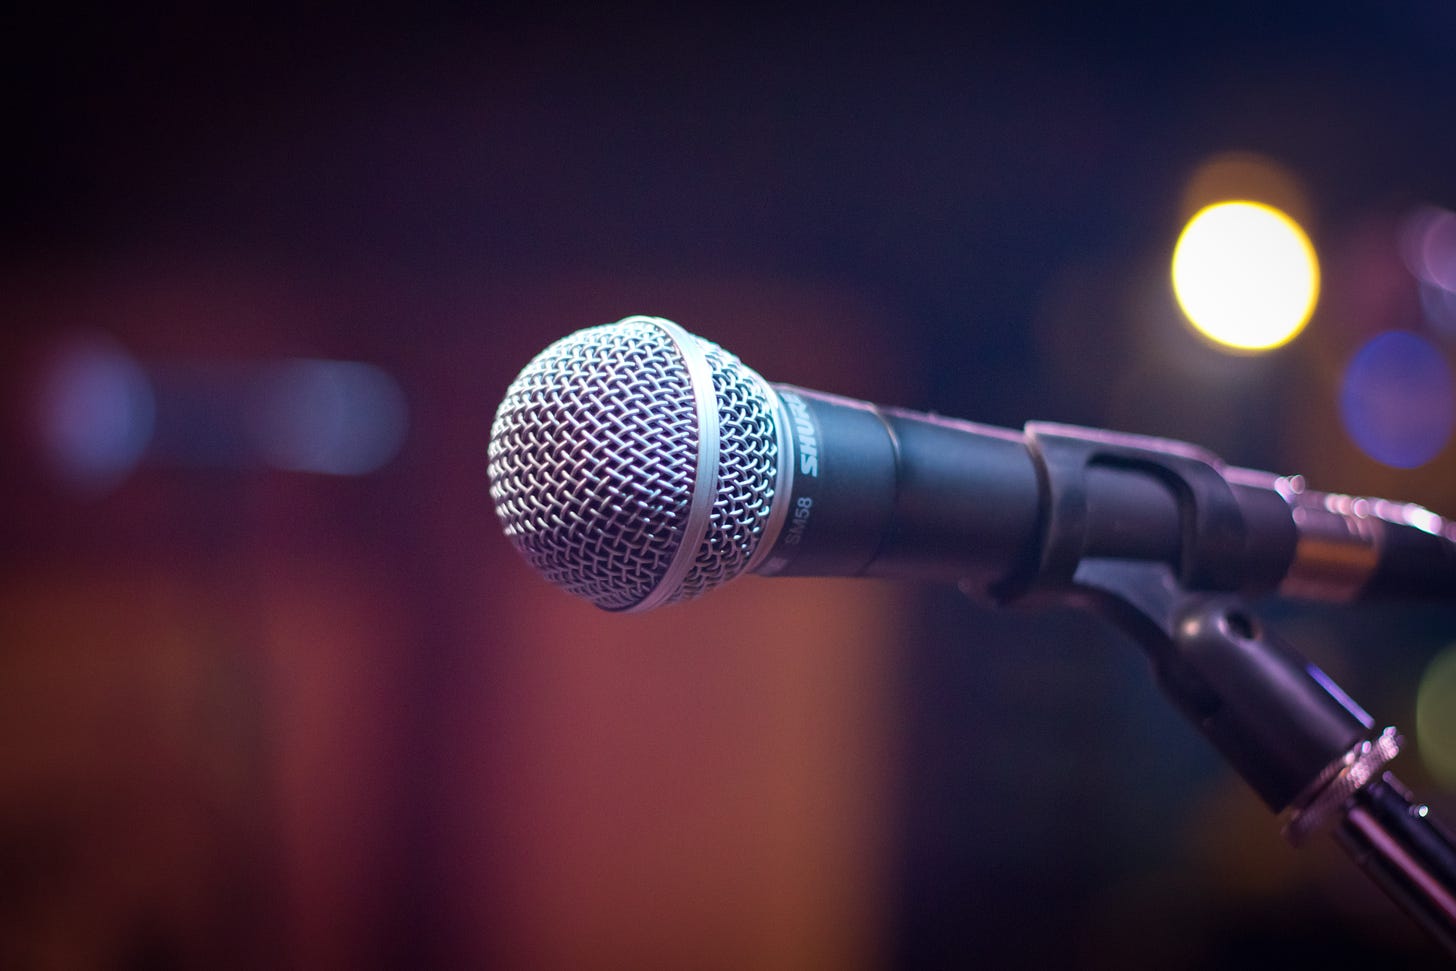 a zoomed in picture of a microphone on a stage. The background is blurred out.